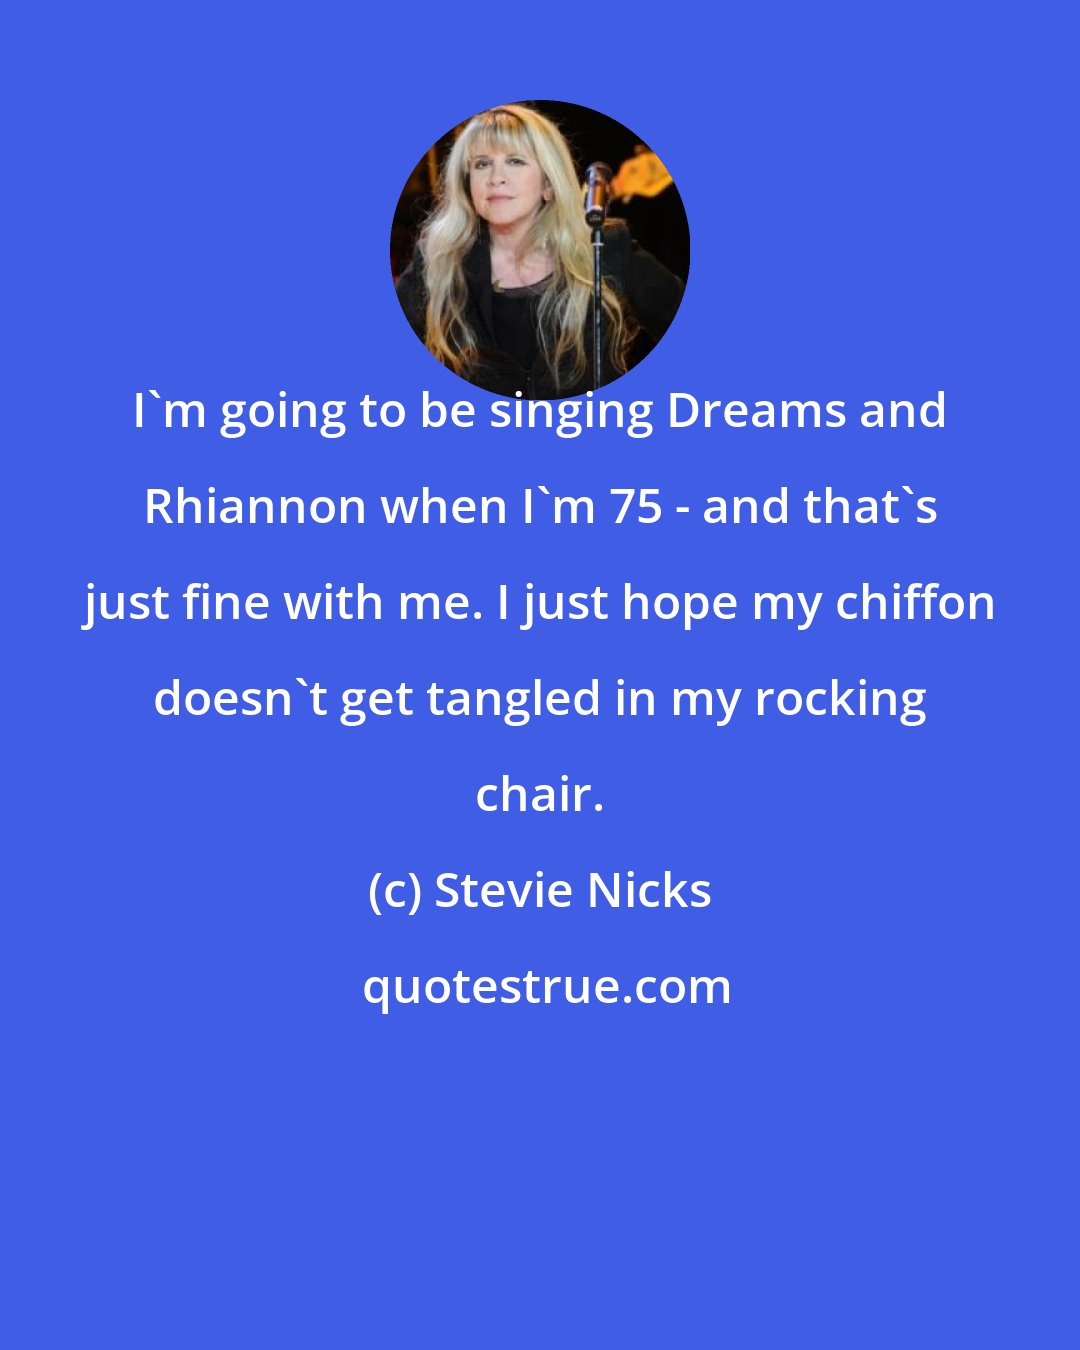 Stevie Nicks: I'm going to be singing Dreams and Rhiannon when I'm 75 - and that's just fine with me. I just hope my chiffon doesn't get tangled in my rocking chair.